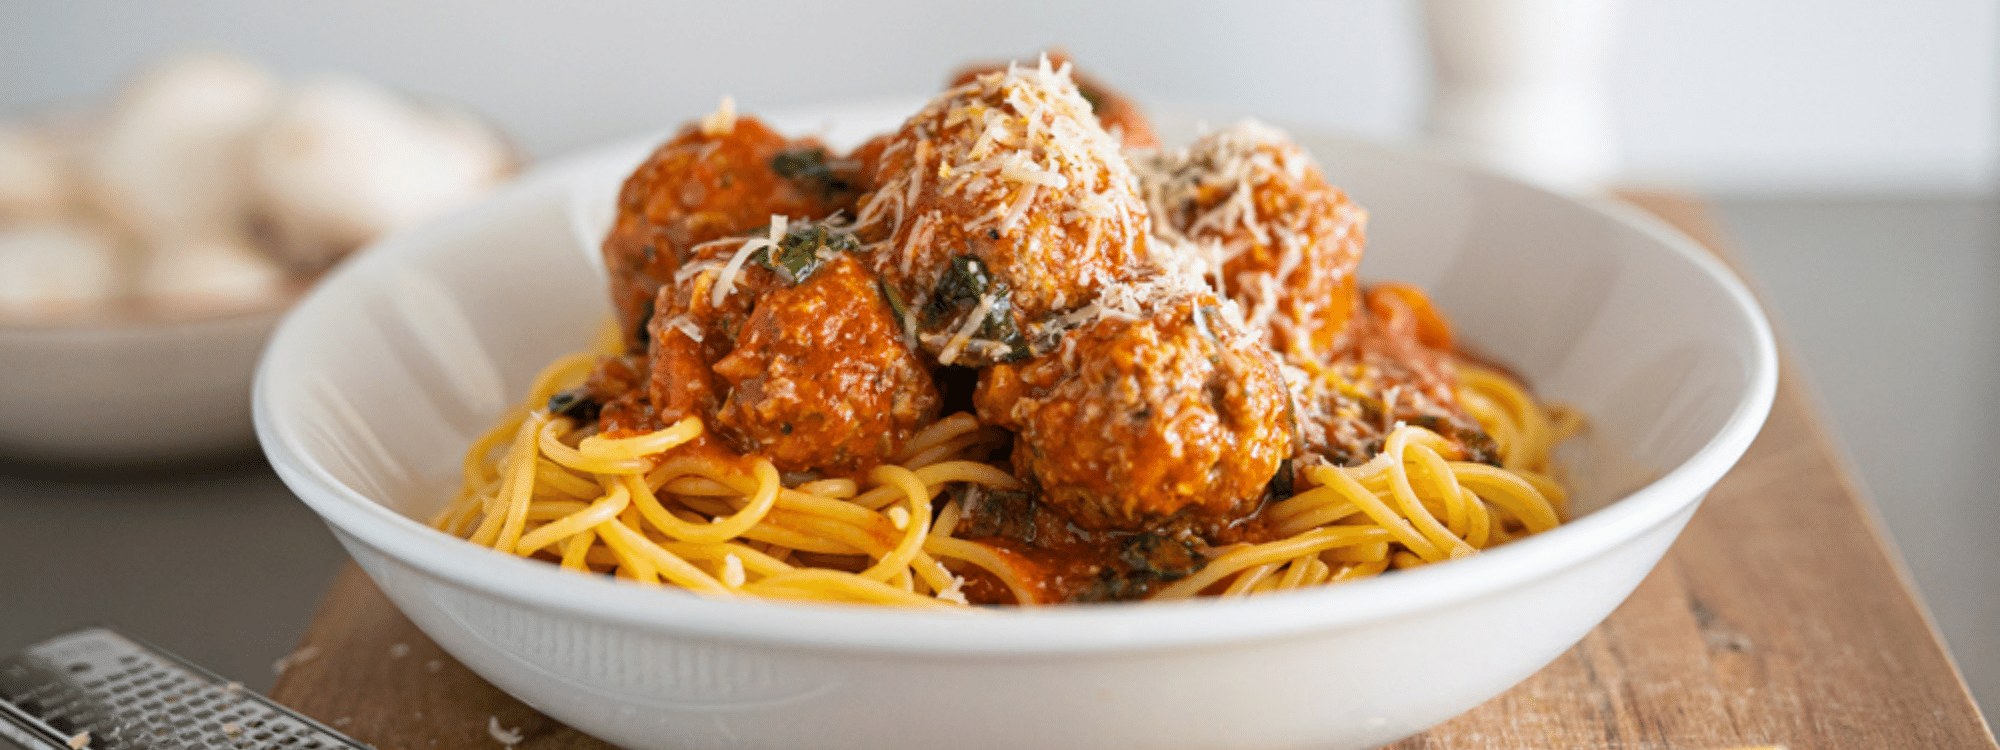 The Blend – Nonnas Beef and Mushroom Blended Meatballs